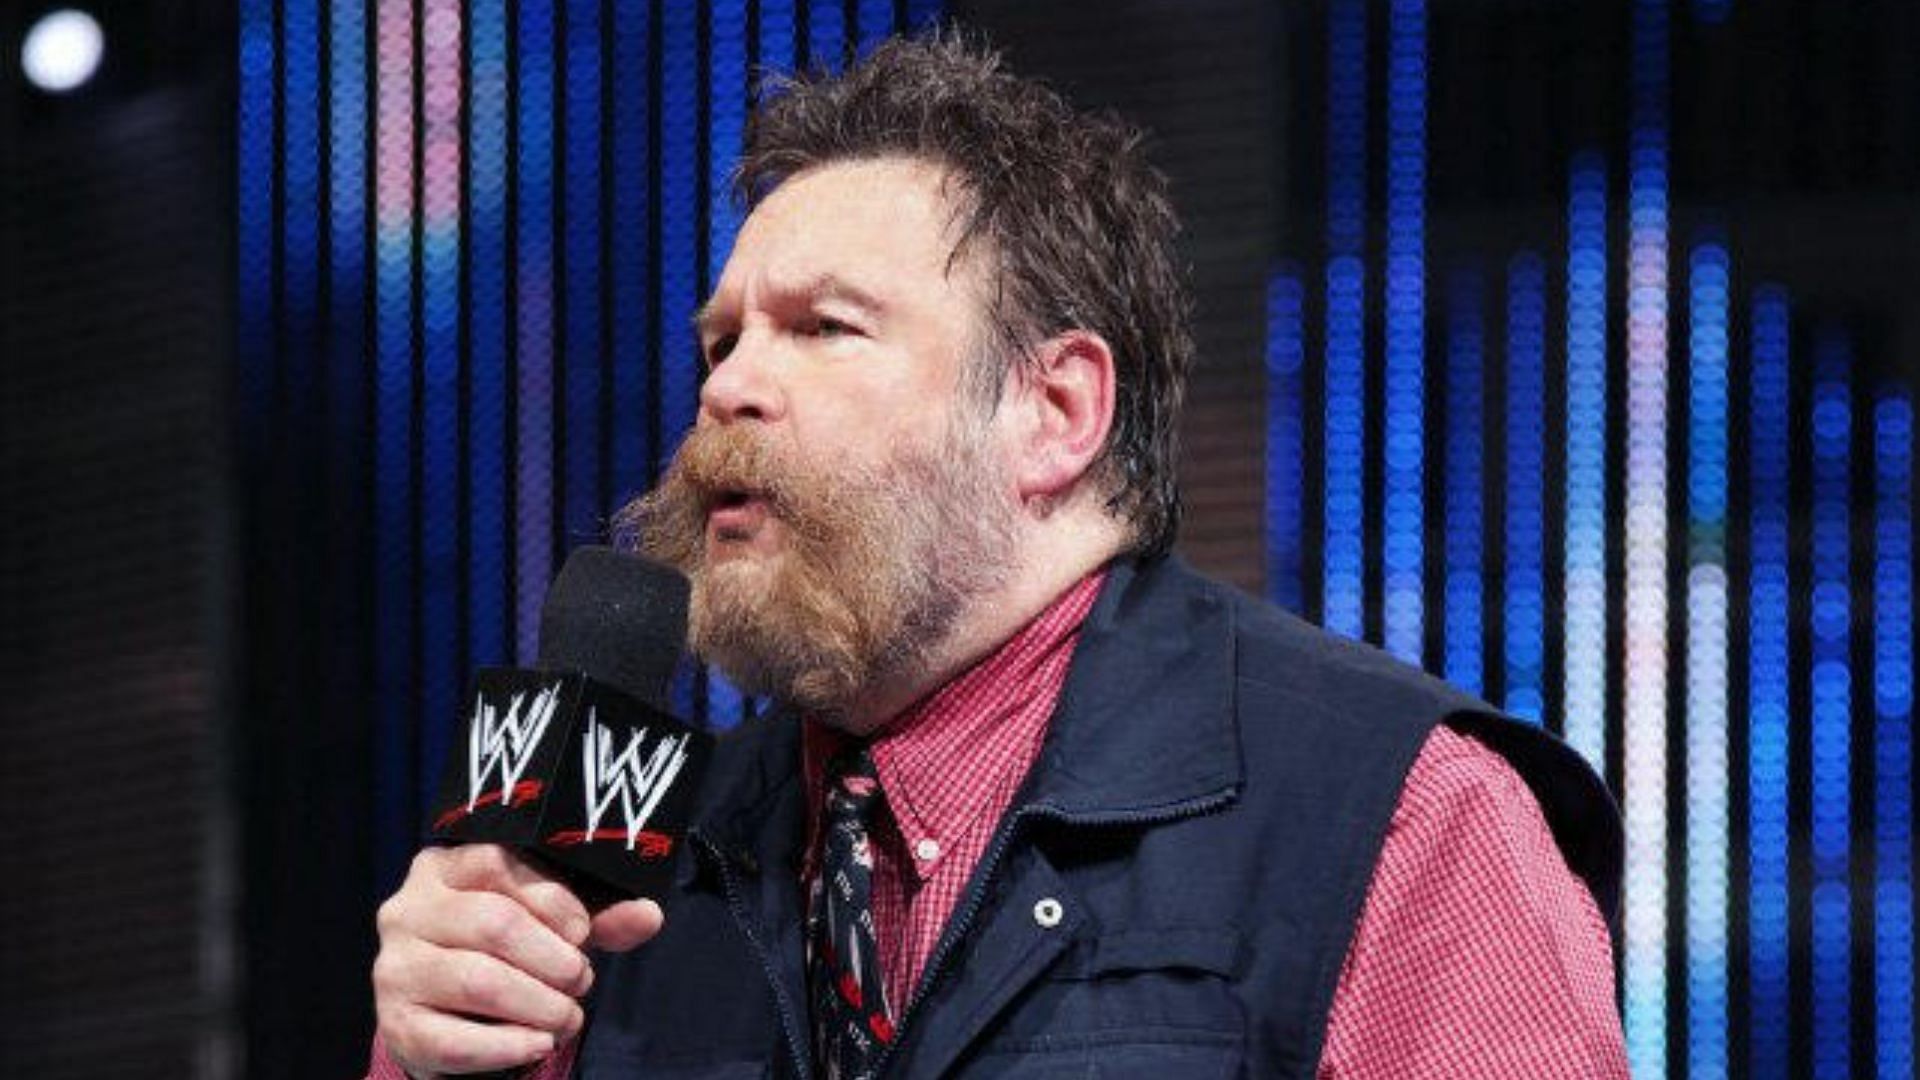 Dutch Mantell was known as Zeb Colter in WWE.